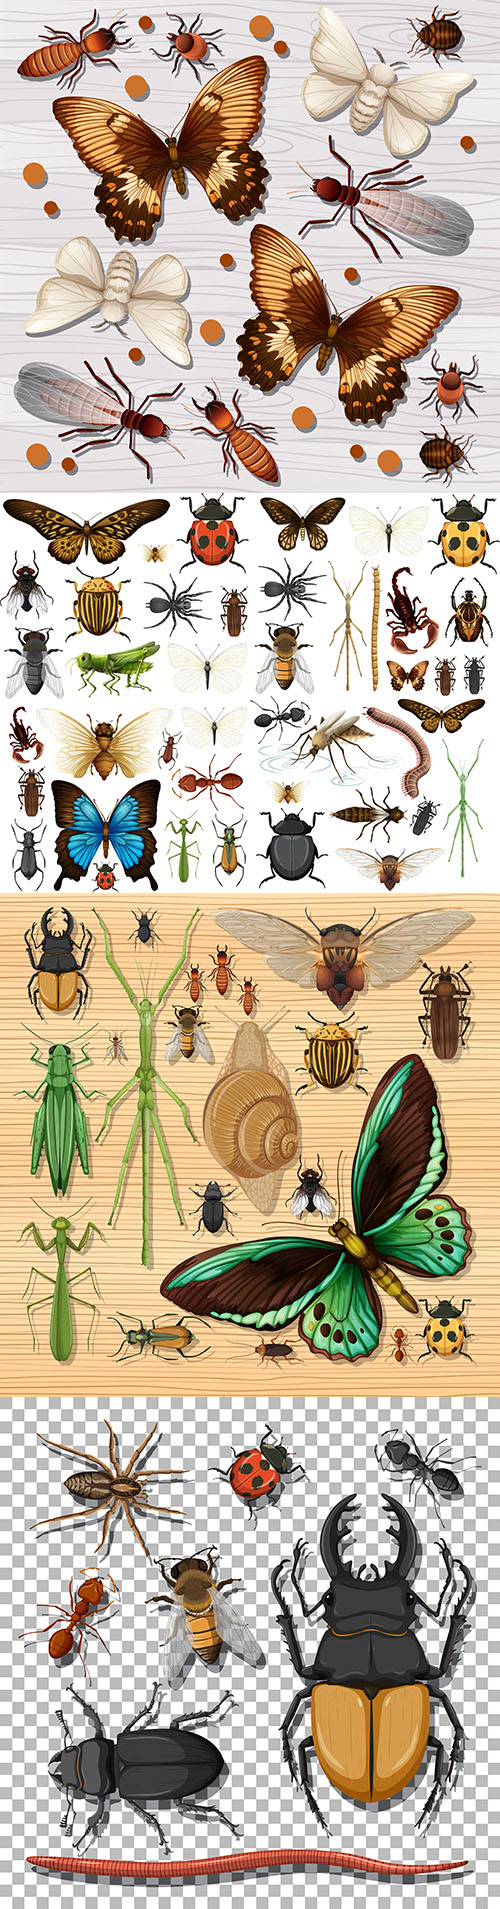 Set of different insects on background of white wooden wallpaper
